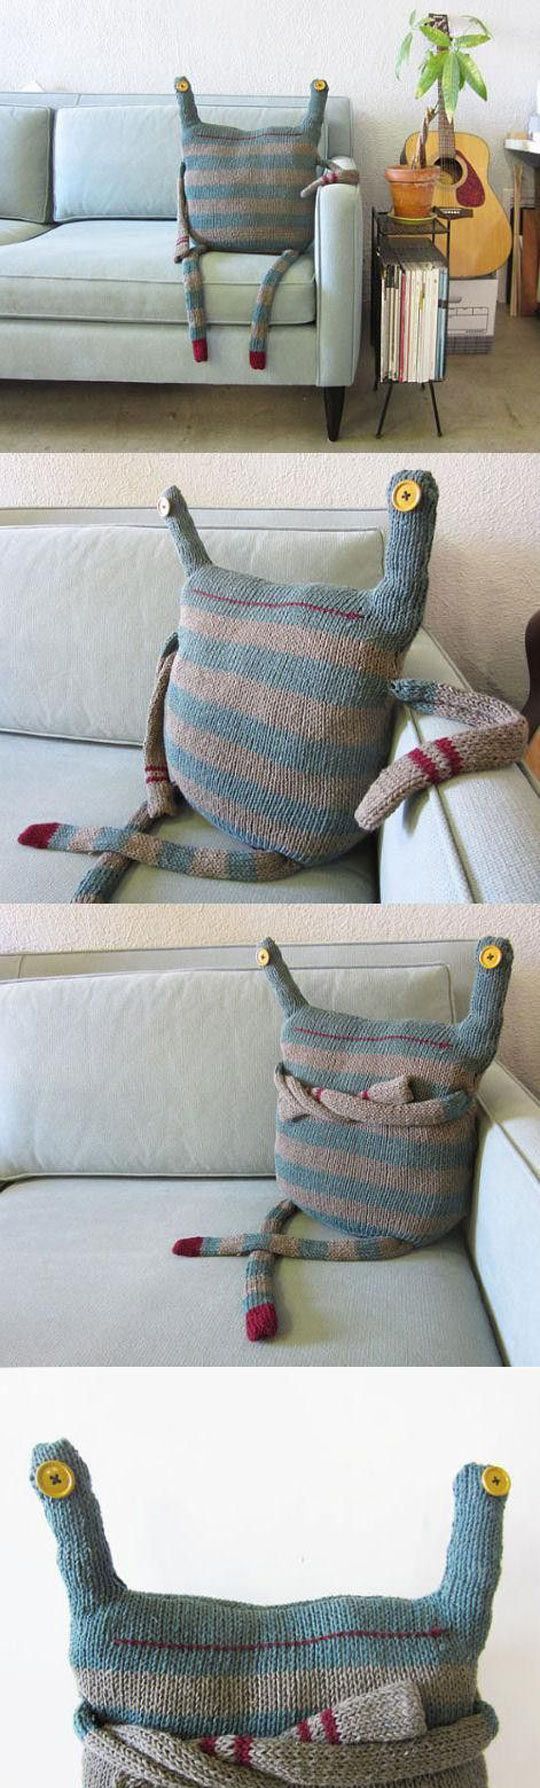 This pillow.